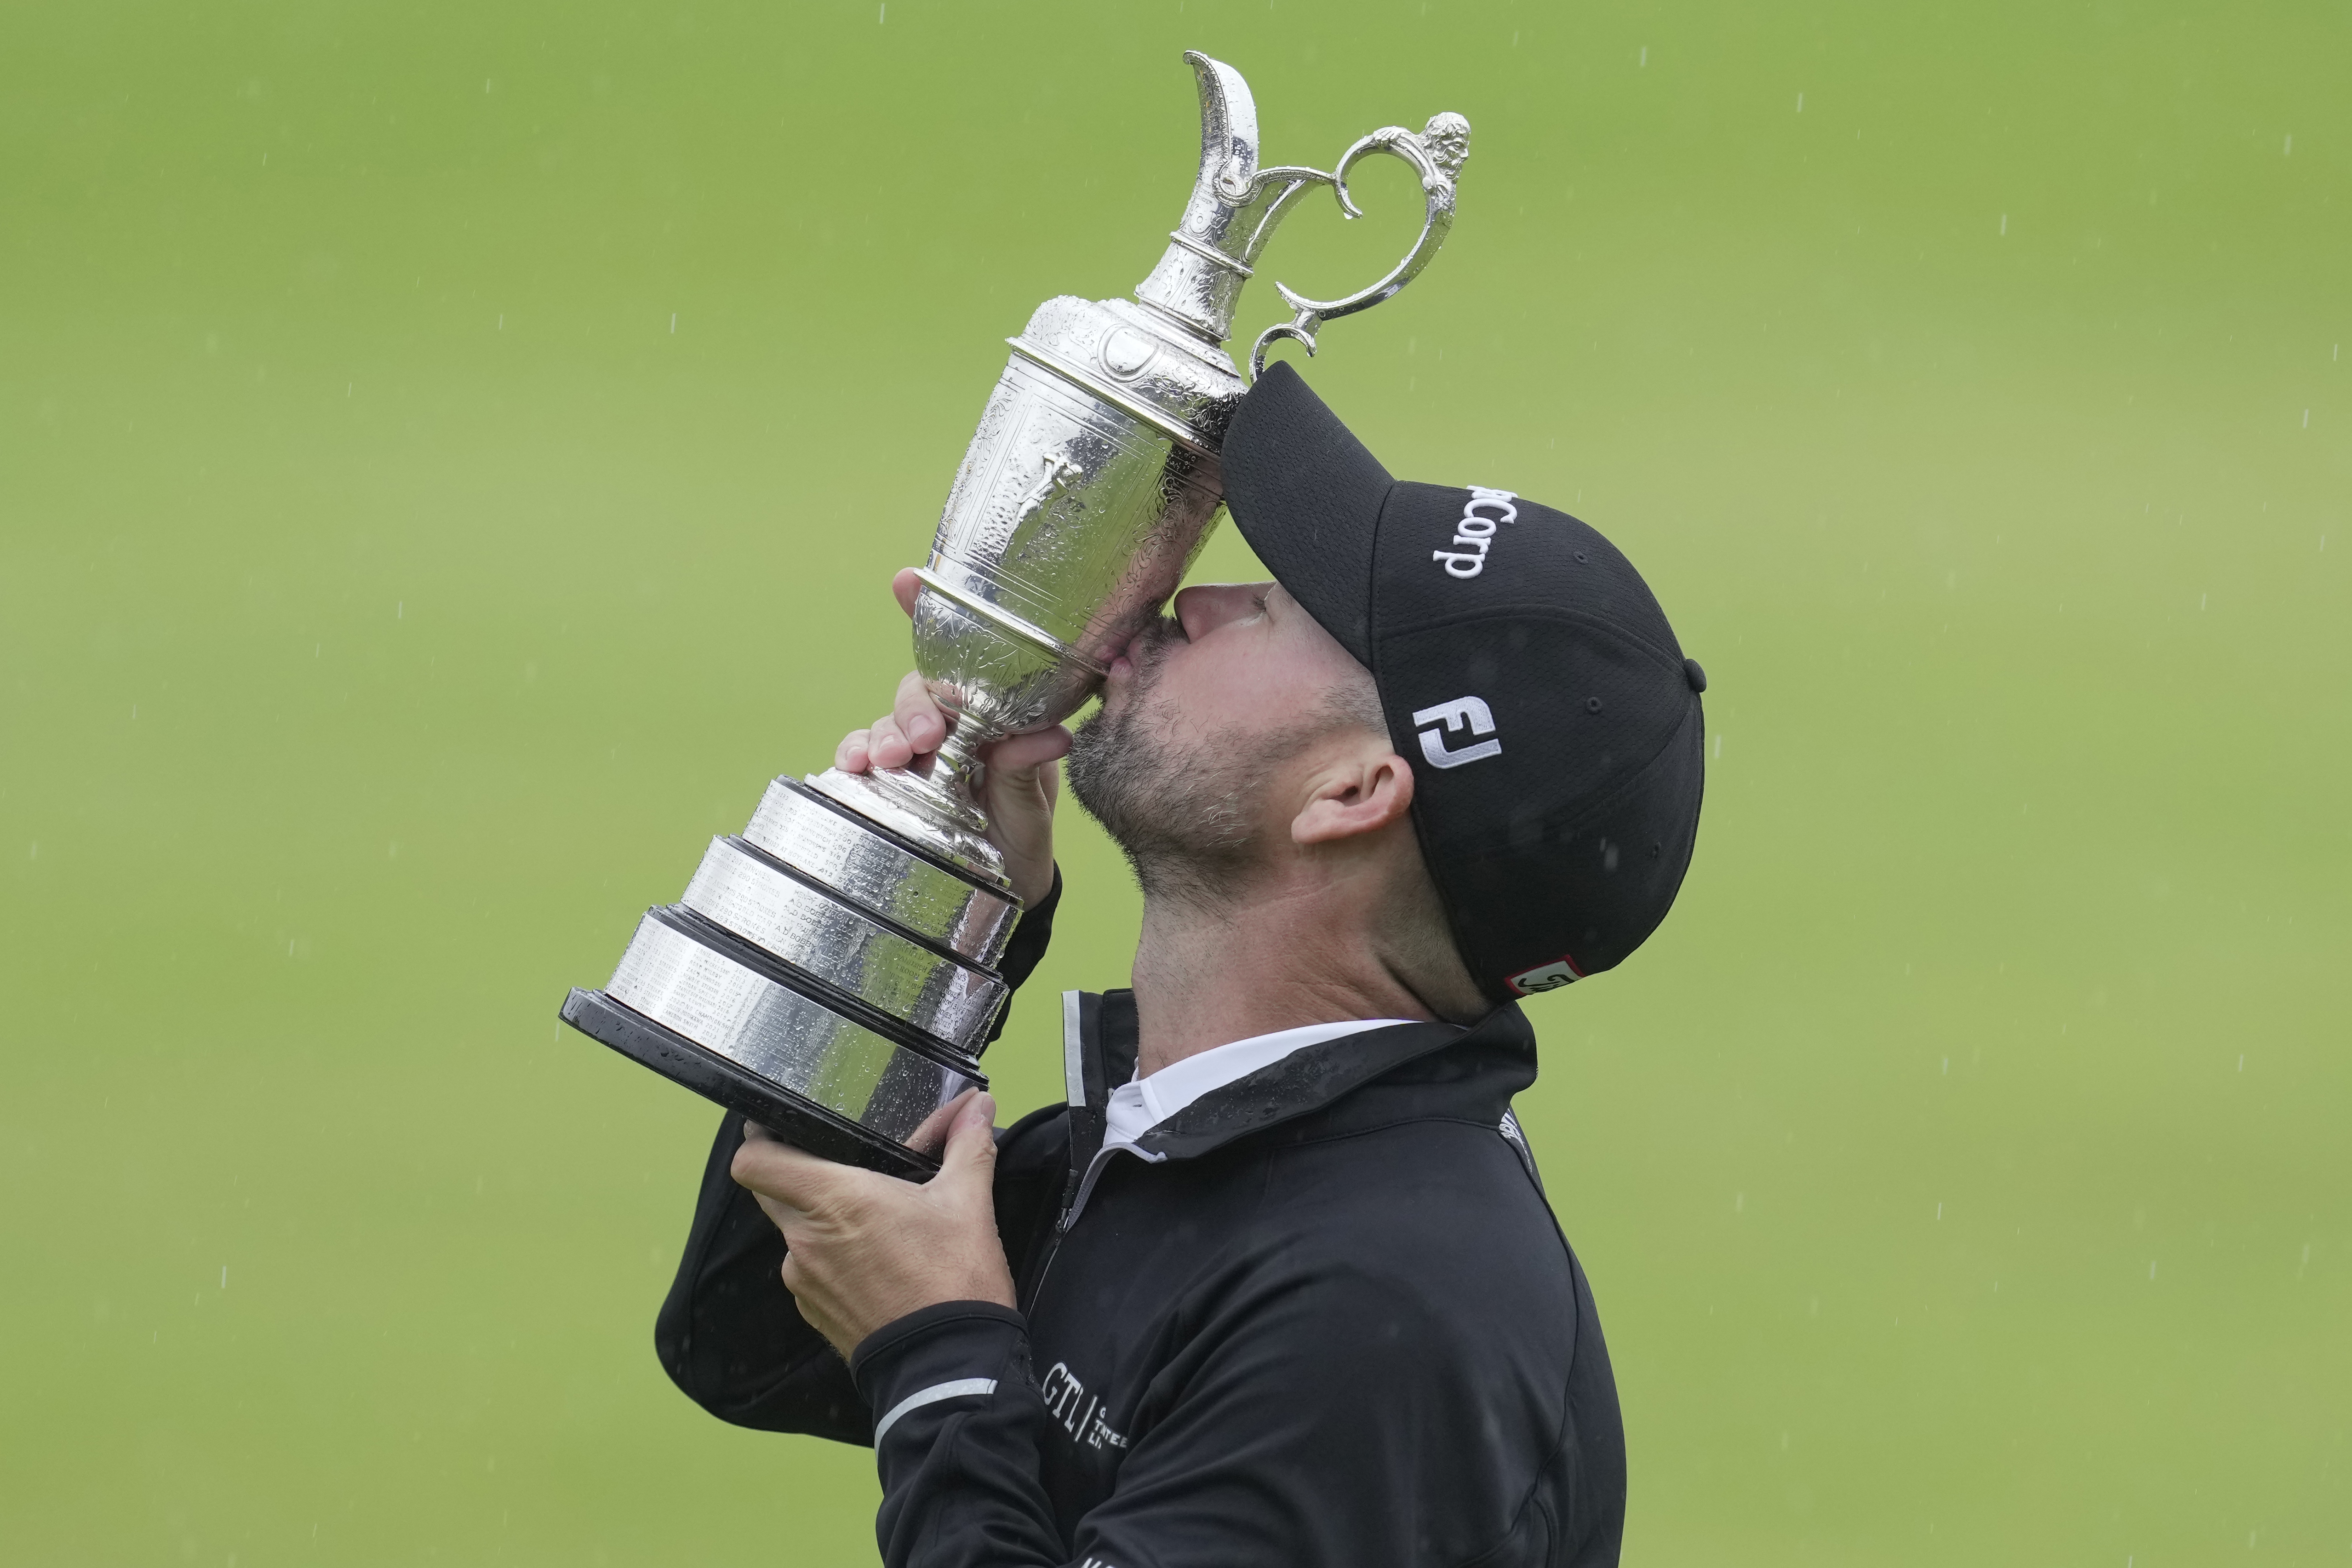 Live updates Brian Harman to put claret jug to some use after winning British Open